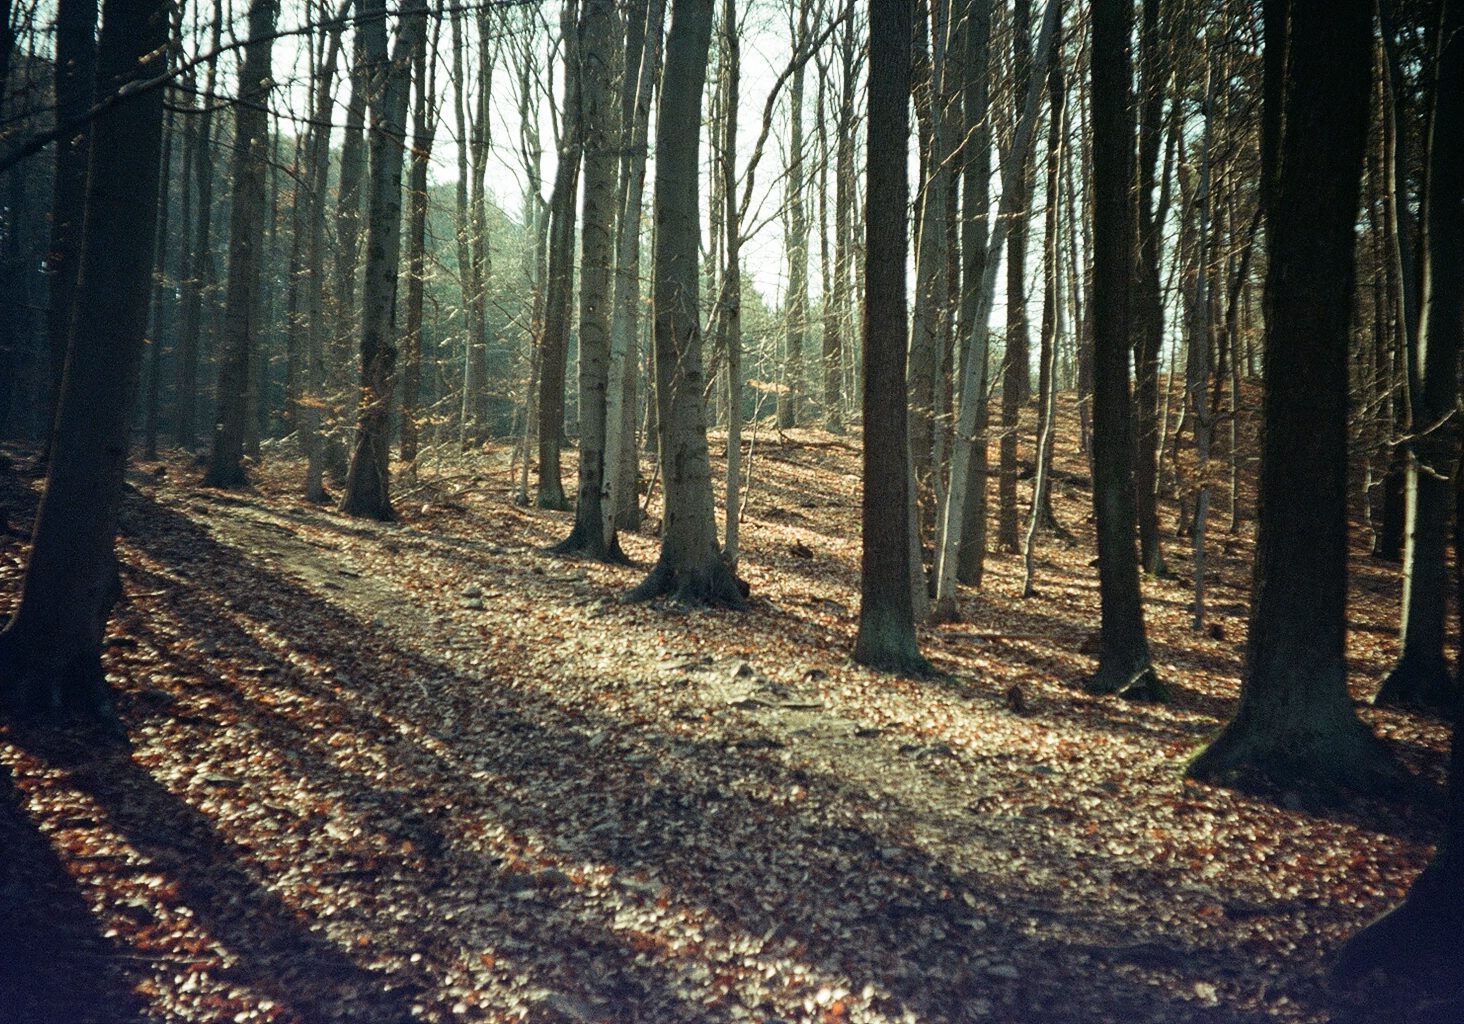 forest by Marketa on flickr